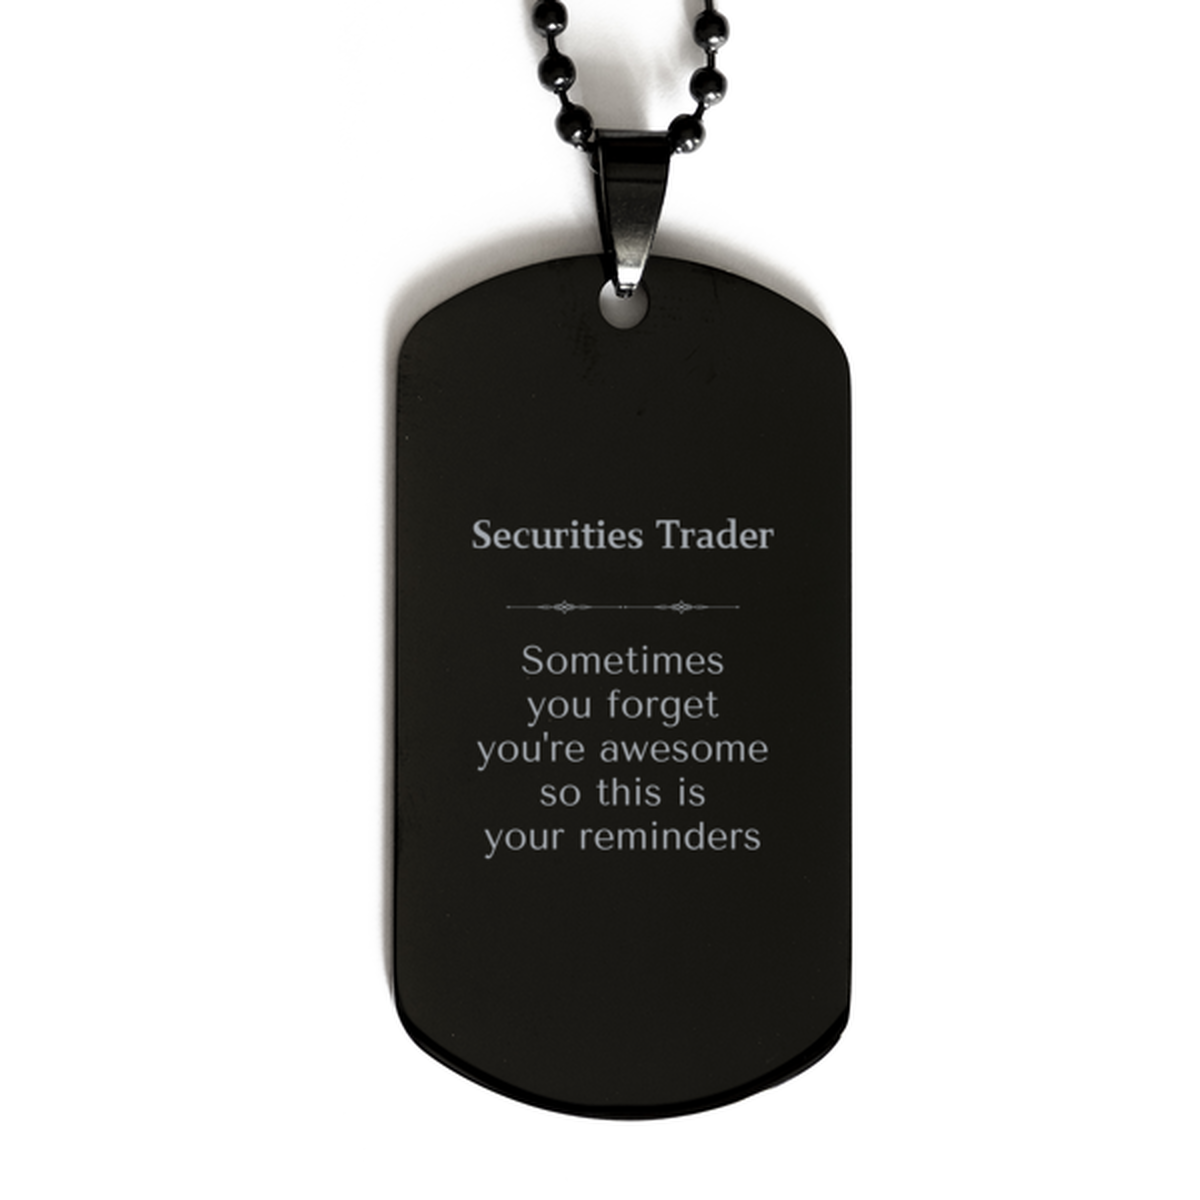 Sentimental Securities Trader Black Dog Tag, Securities Trader Sometimes you forget you're awesome so this is your reminders, Graduation Christmas Birthday Gifts for Securities Trader, Men, Women, Coworkers